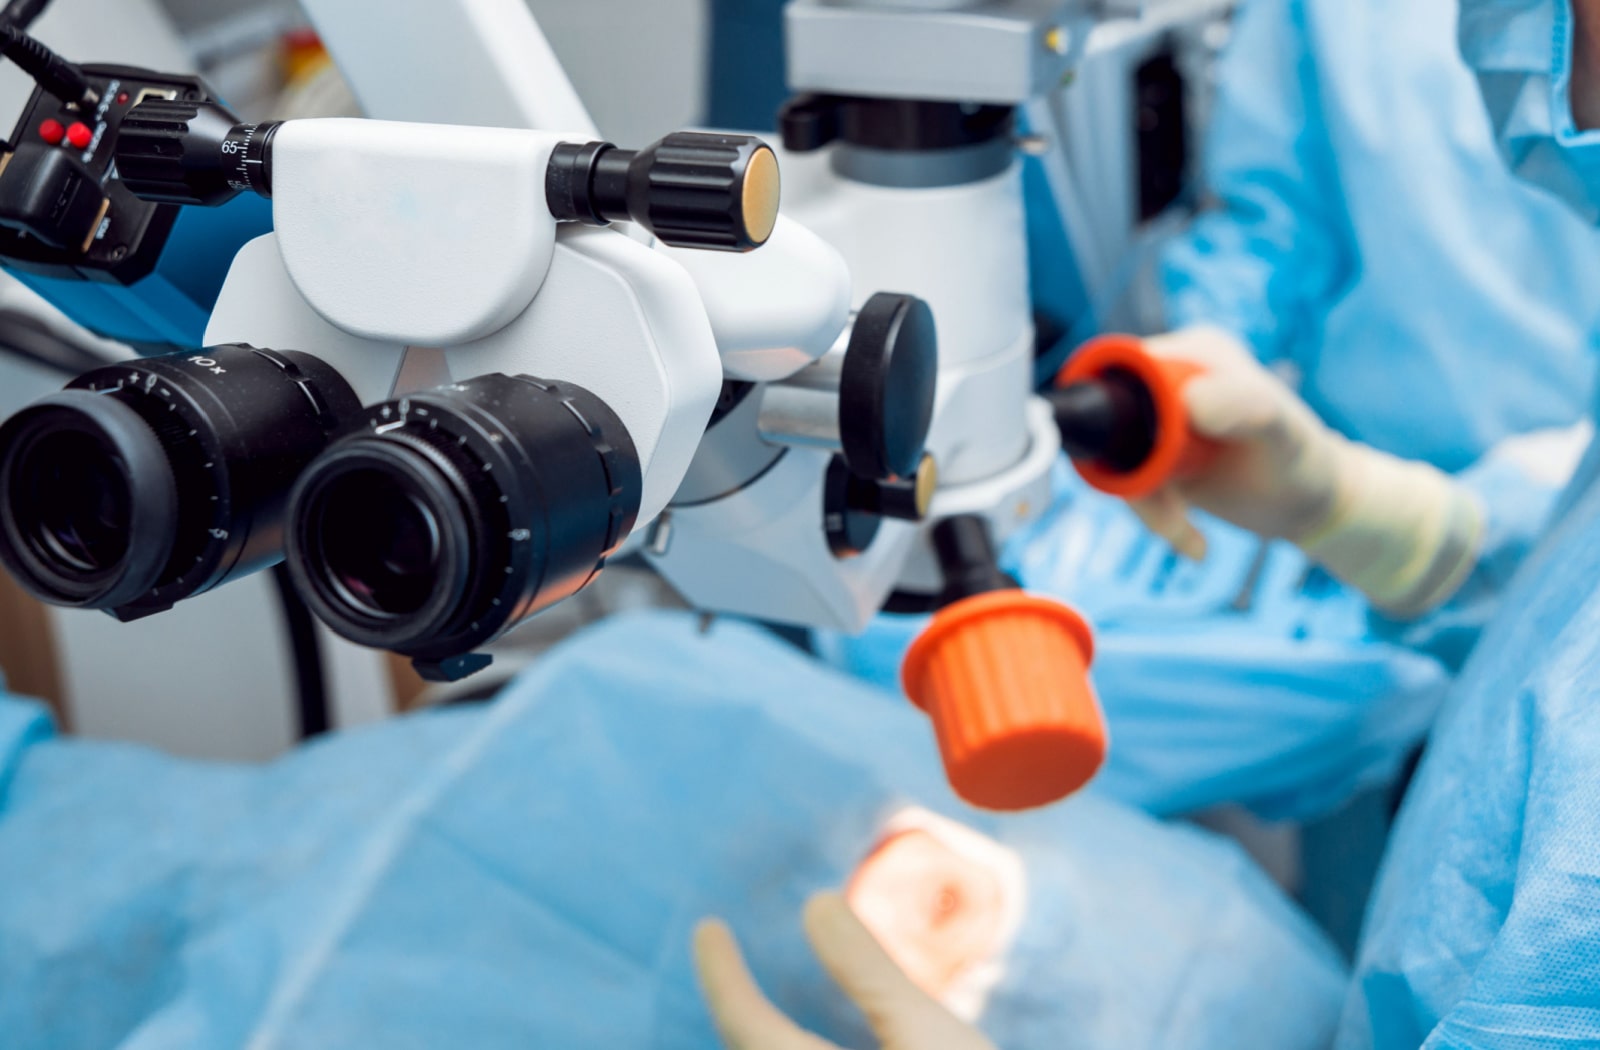 A surgeon preparing for cataract surgery on a patient